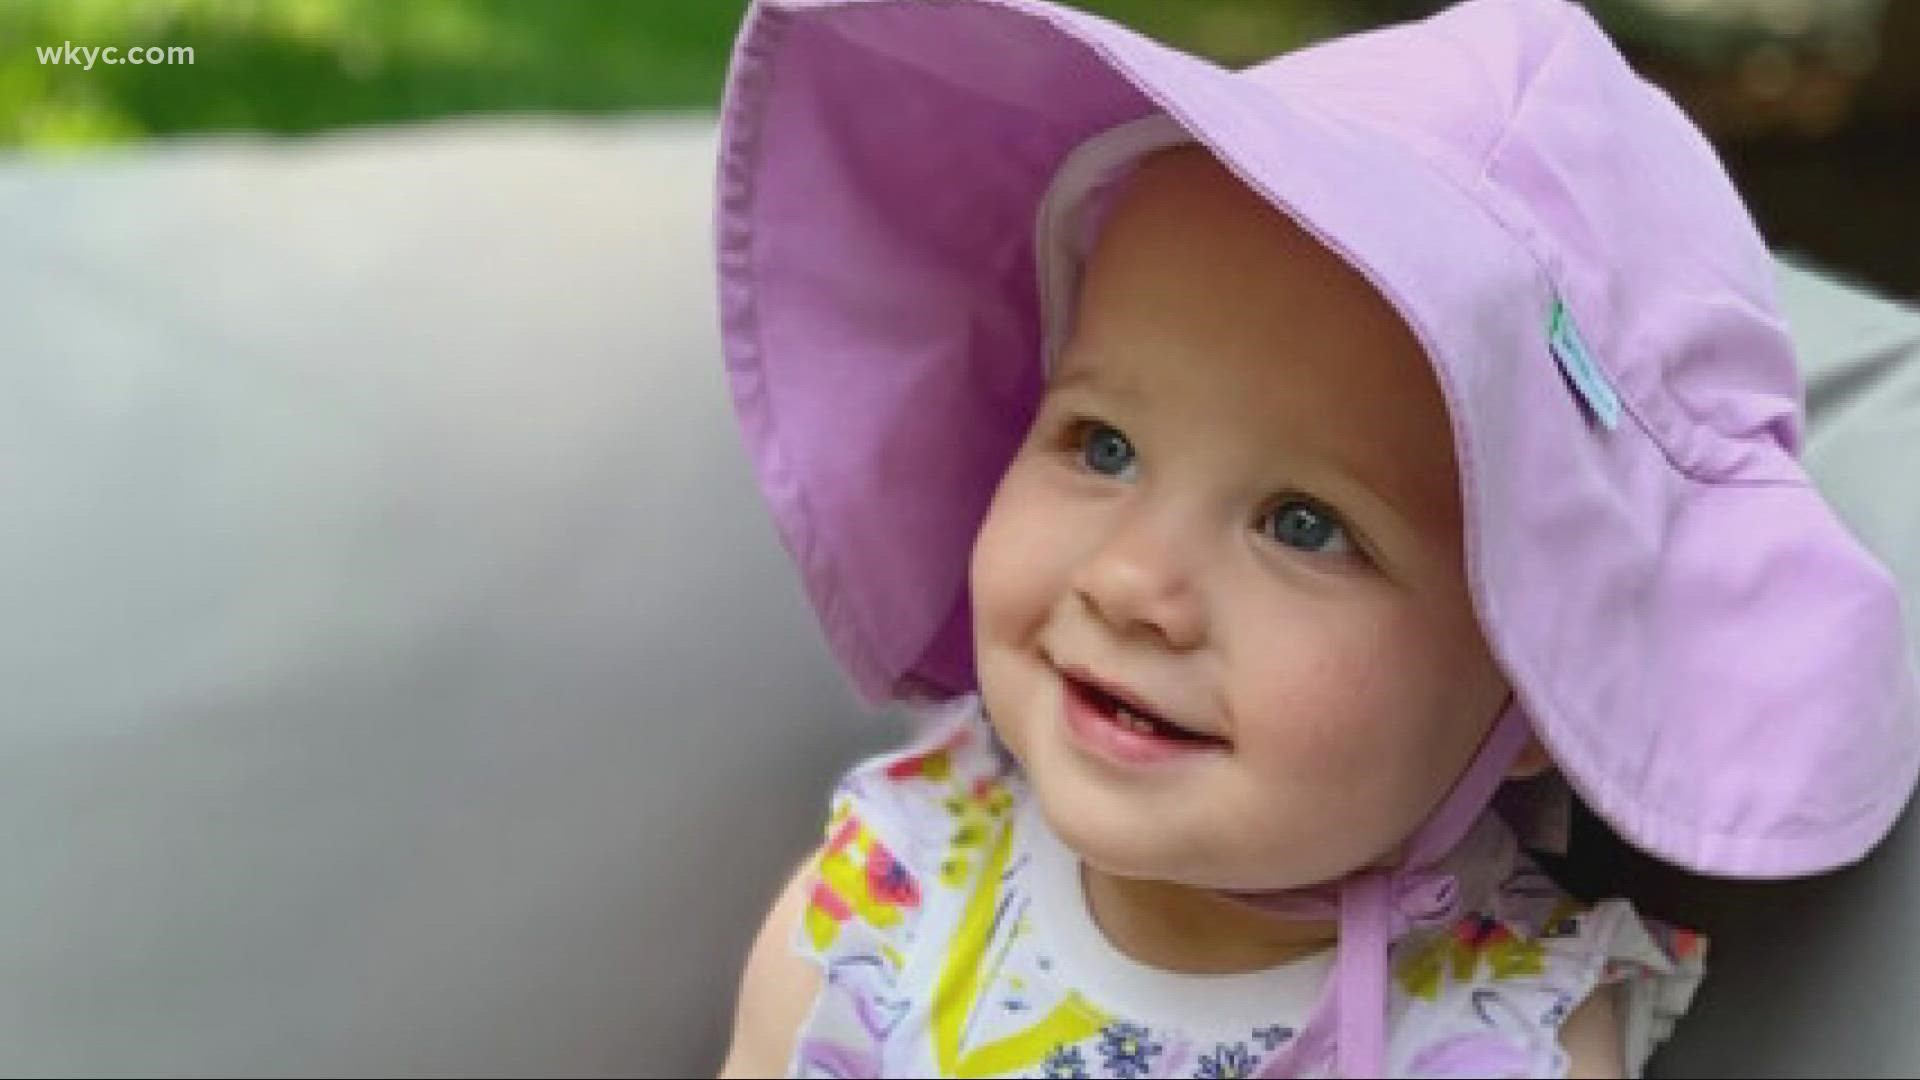 Paisley Palmer isn't letting leukemia slow her down -- but she needs help from just the right person to beat her blood cancer. Sara Shookman reports.